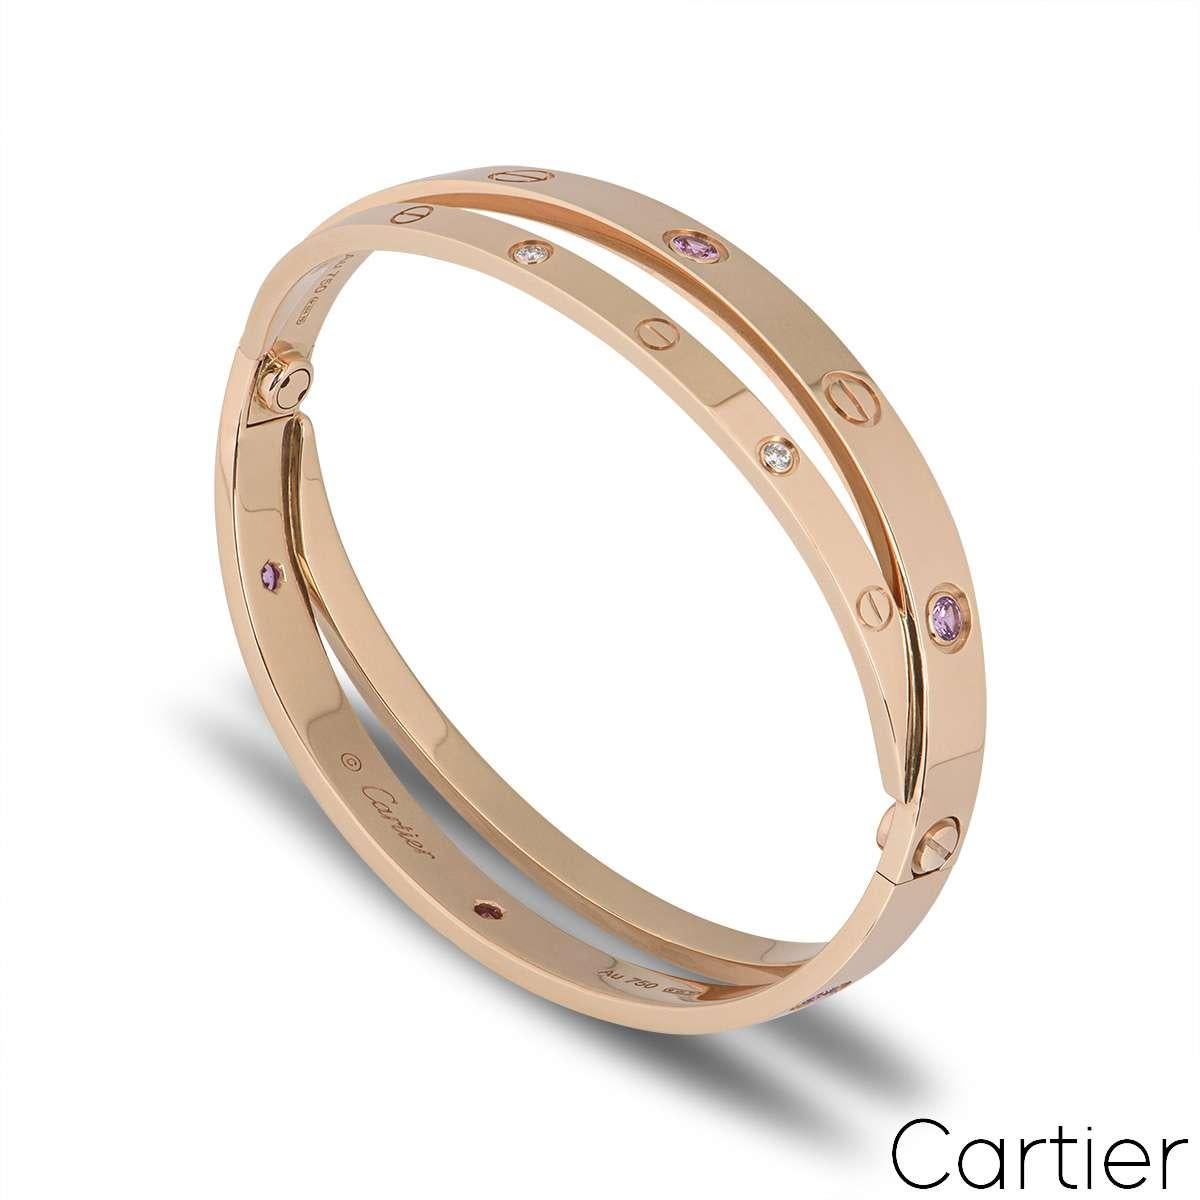 An 18k rose gold half diamond and pink sapphire double Cartier bracelet, from their signature Love collection. Featuring the iconic Cartier screw motif, alternating with 6 round brilliant cut diamonds and 6 pink sapphires. This bracelet is a size